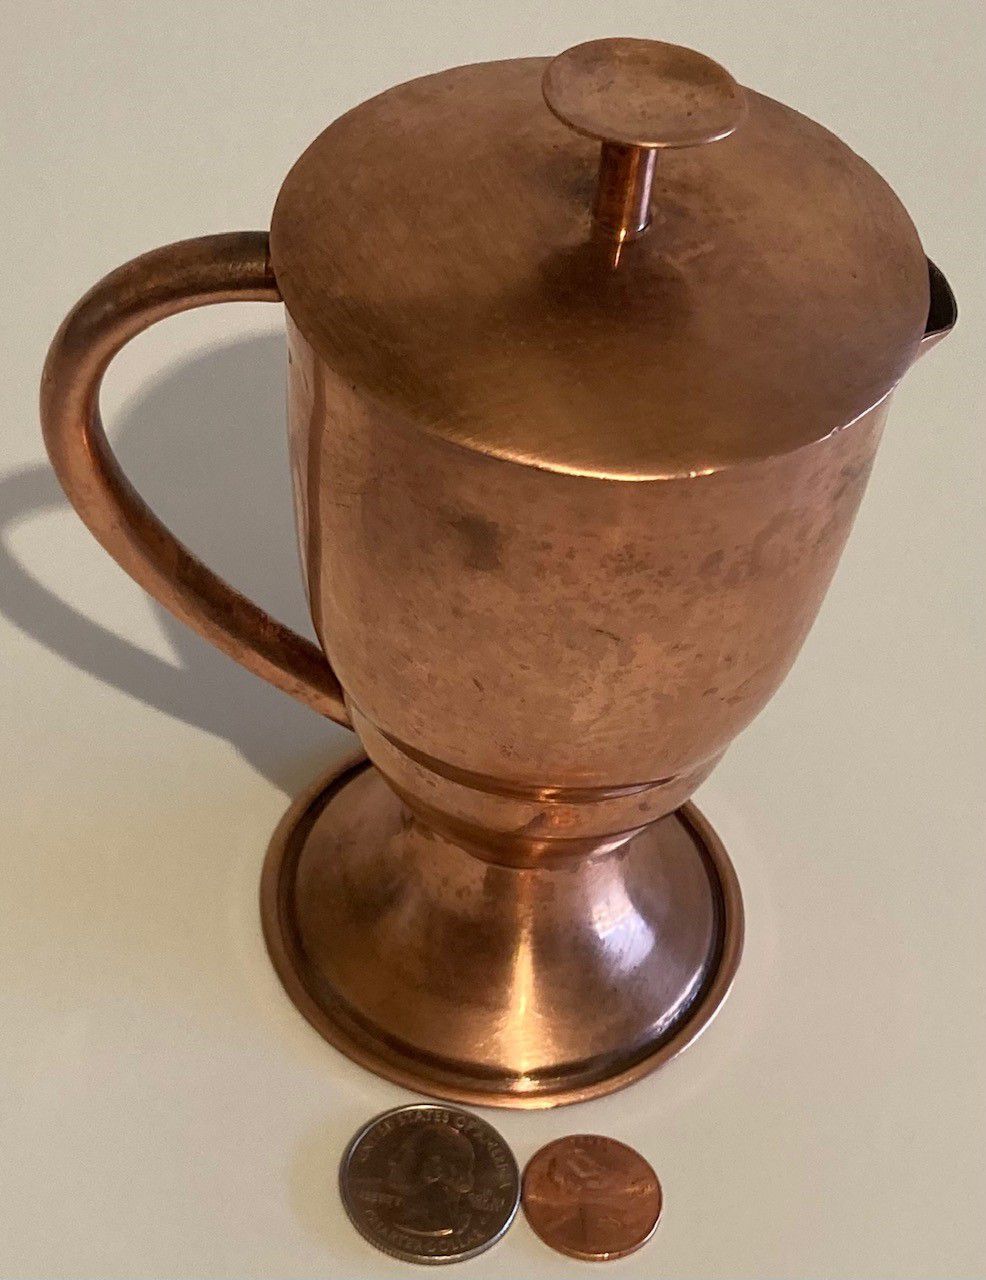 Vintage Metal Copper Serving Pitcher, 5 1/2" Tall, Kitchen Decor, Table Display, Shelf Display, This Can Be Shined Up Even More